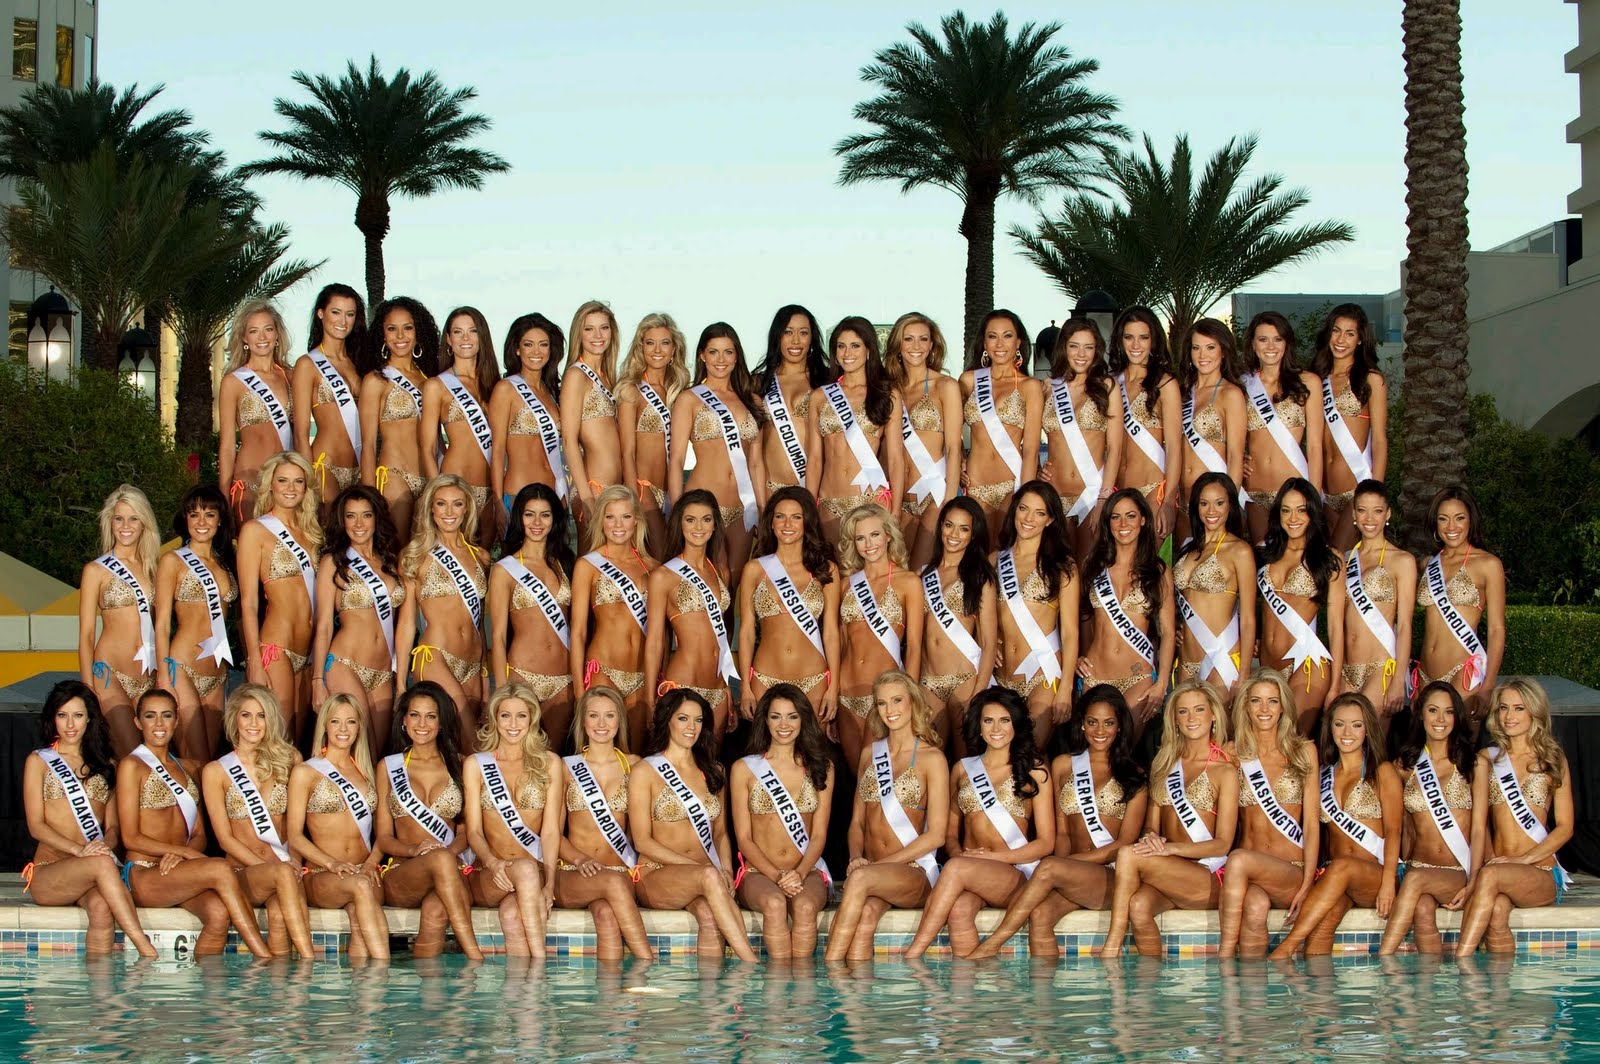 image released by the Miss Universe Organization, the 51 contestants compet...